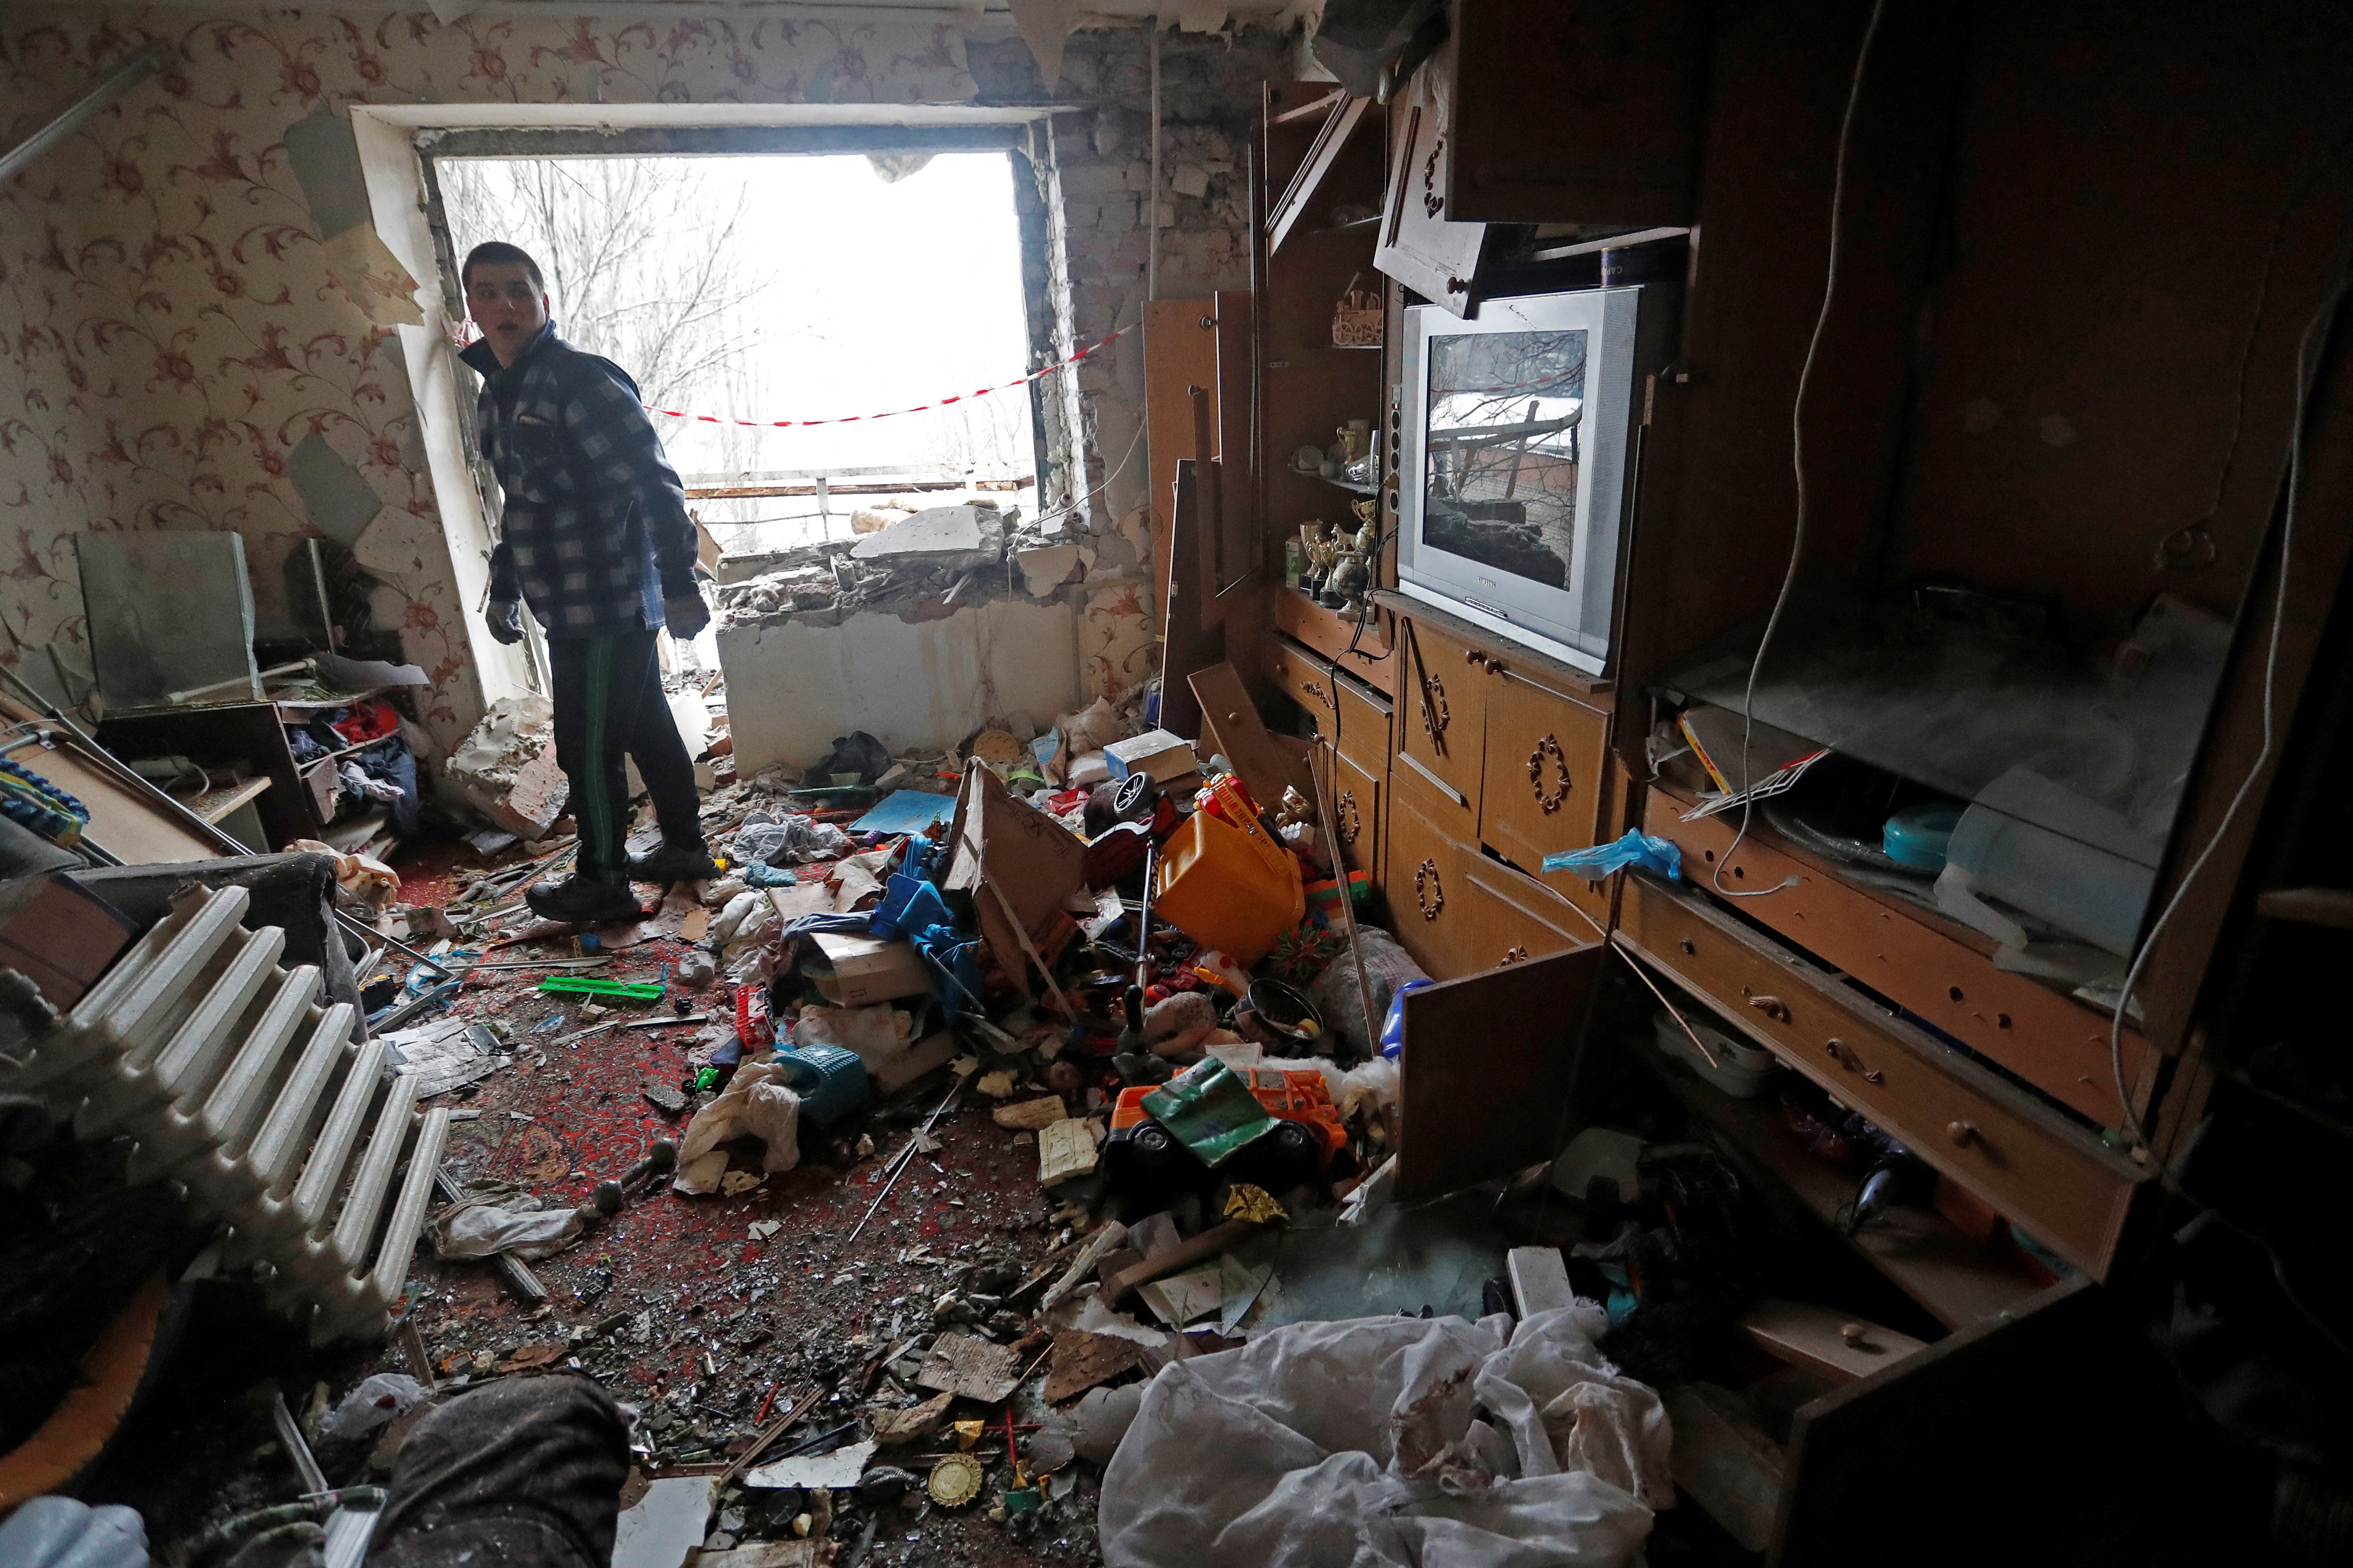 A man stands inside his apartment, which locals said was damaged by recent shelling, in the separatist-controlled town of Yasynuvata in the Donetsk region